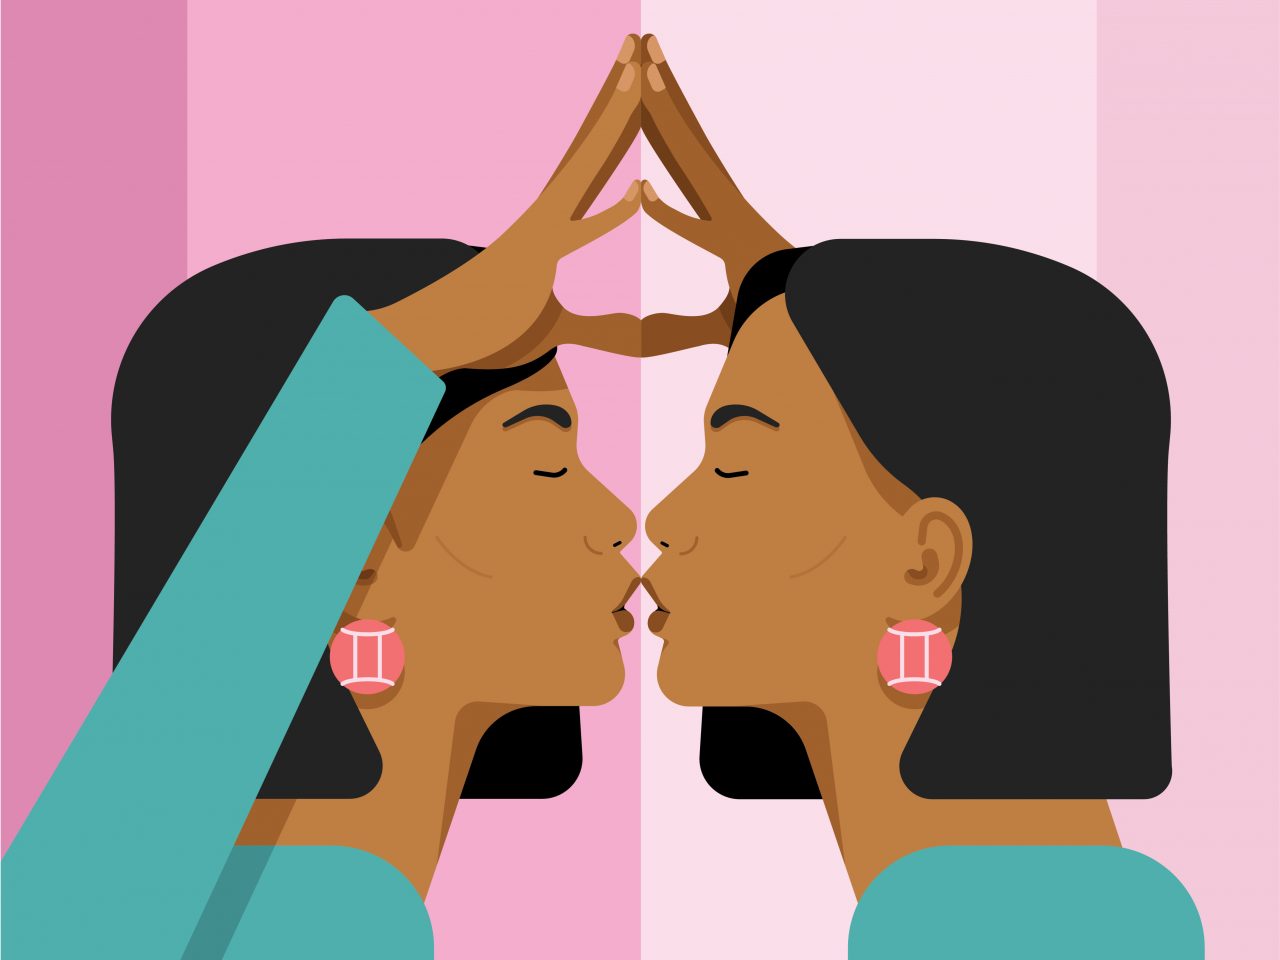 An image of the Gemini zodiac sign for the June 2019 horoscopes from Chatelaine